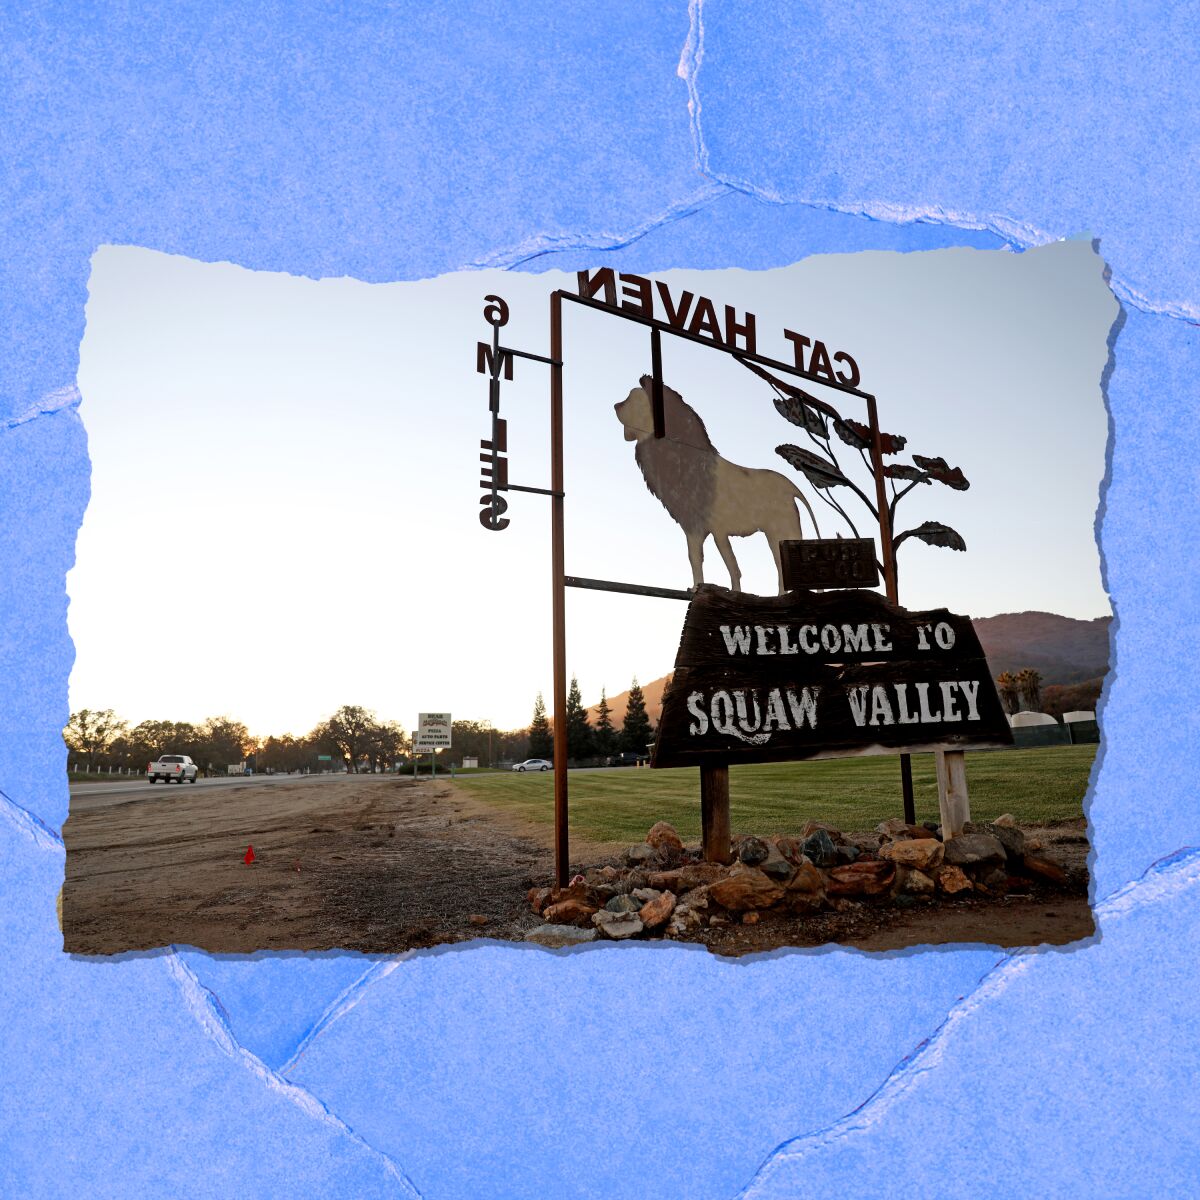 A sign says "Welcome to Squaw Valley."